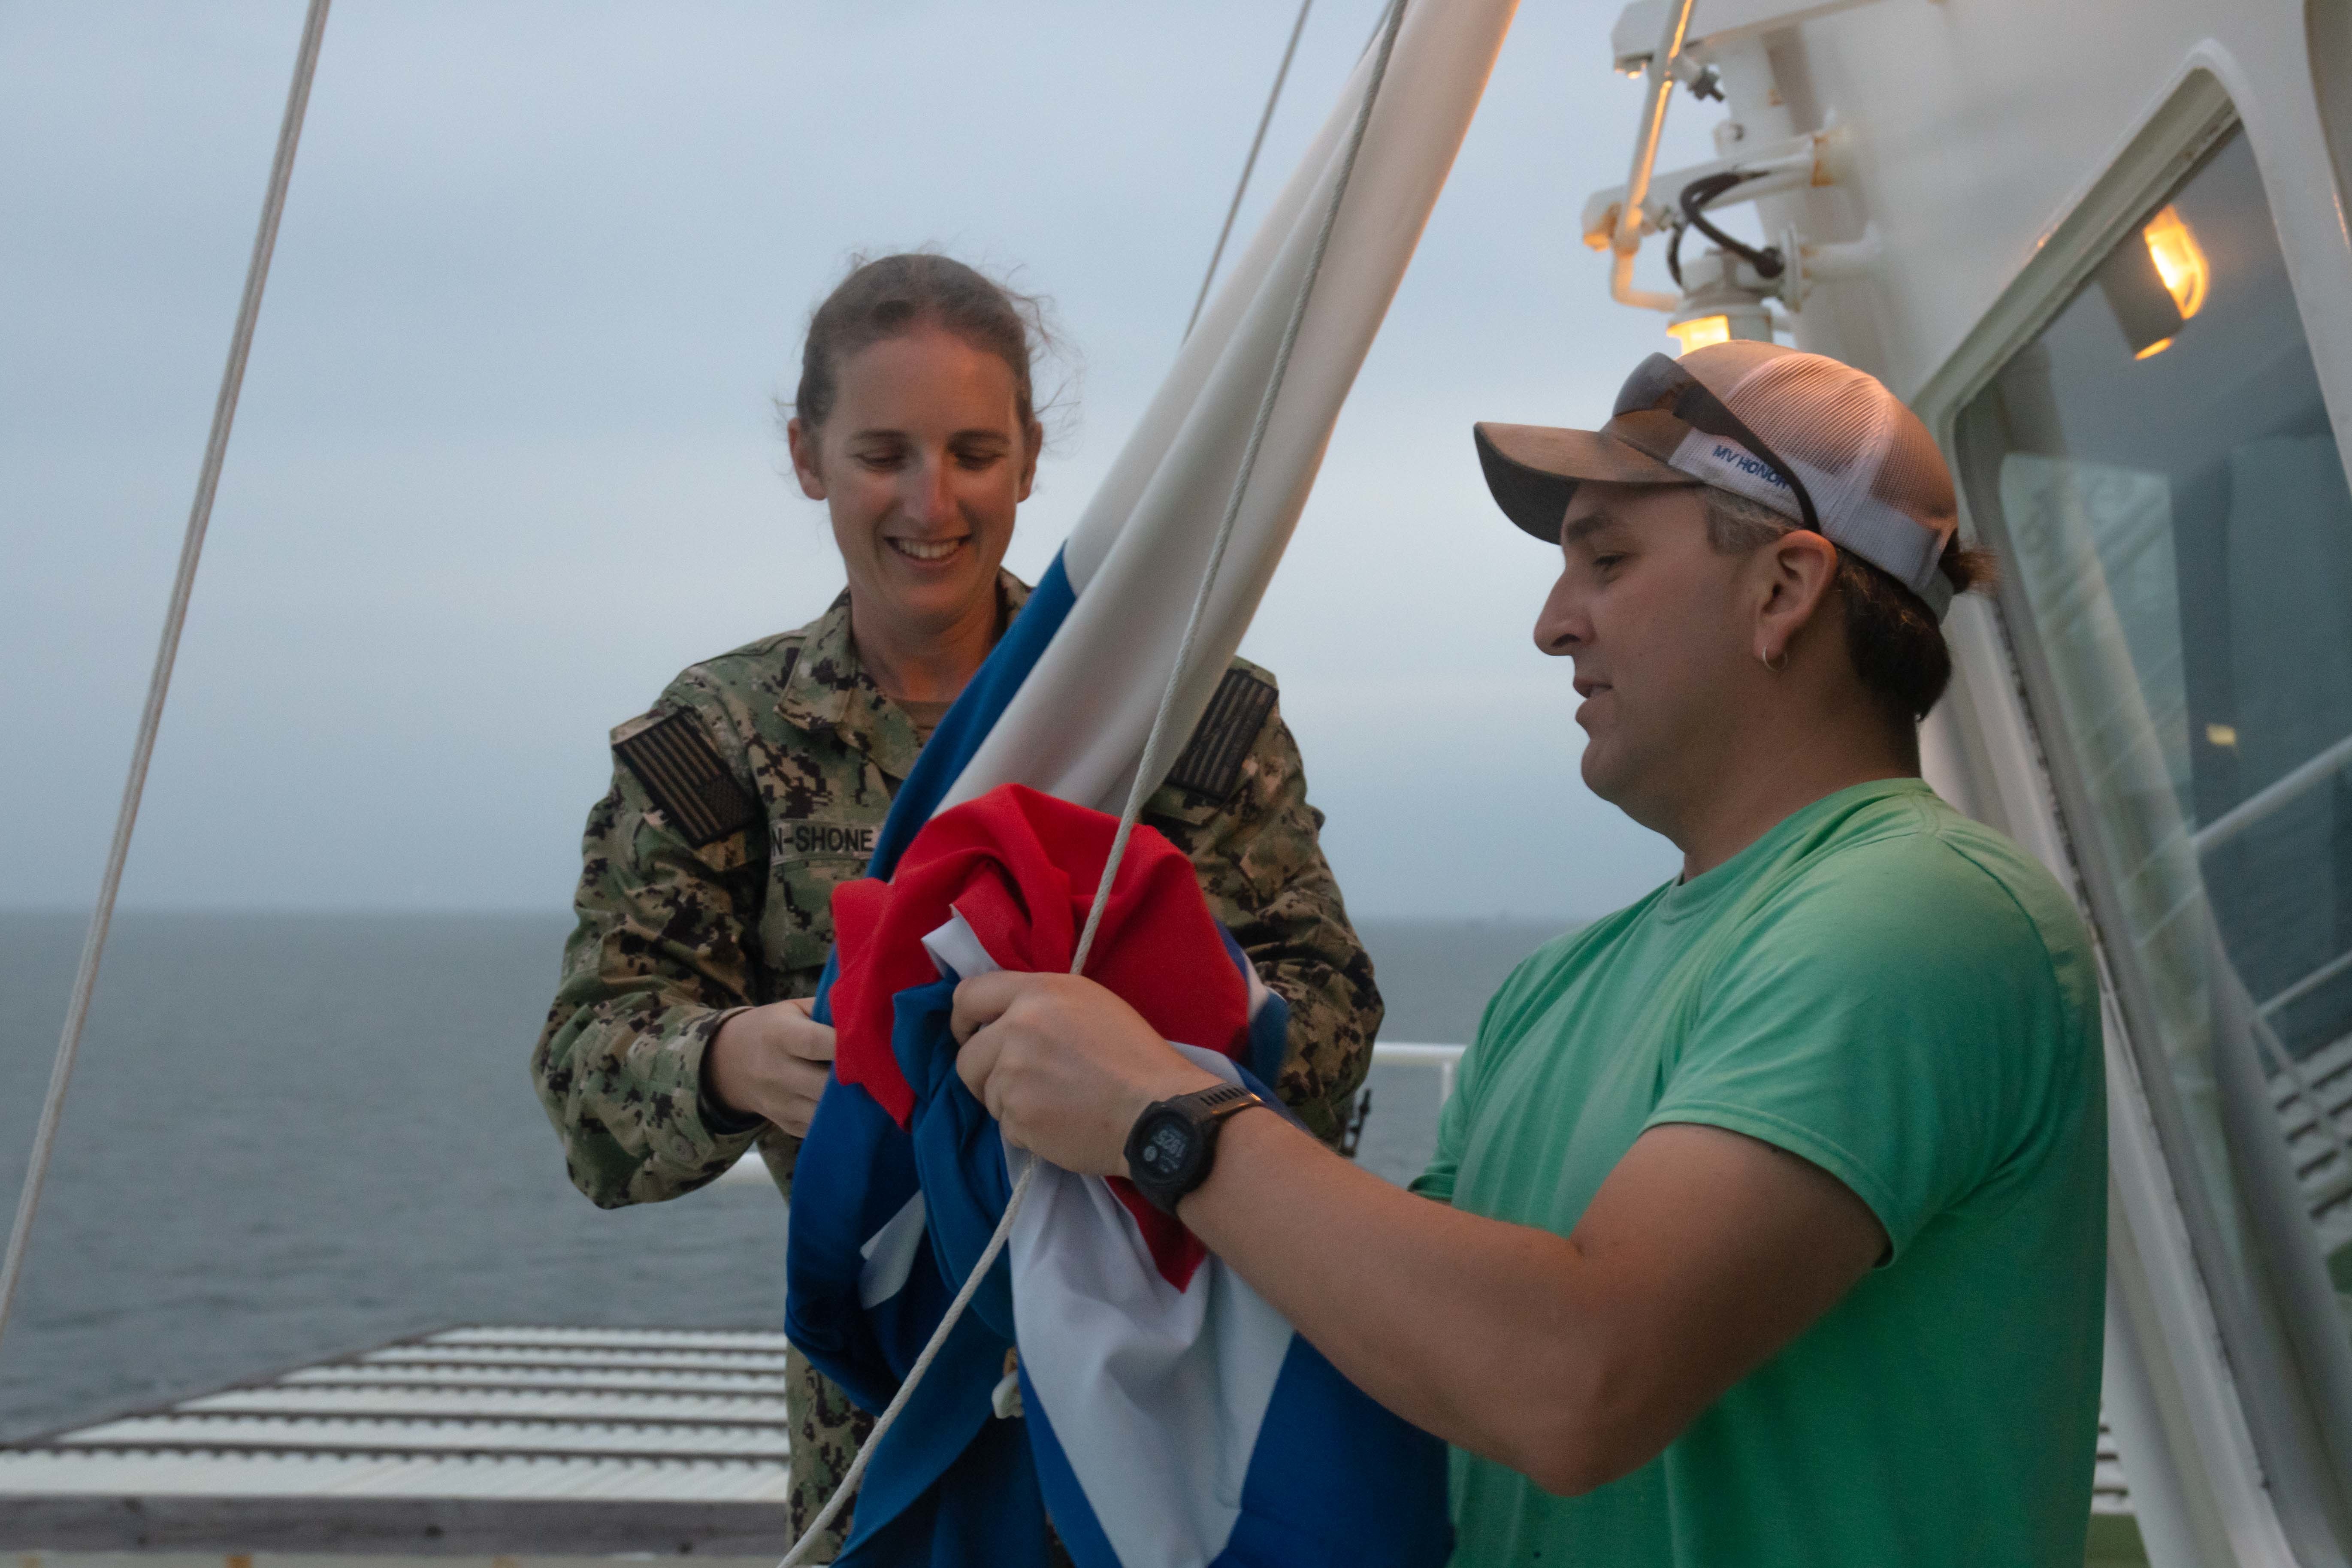 U.S. Navy Ens. Heather Bacon-Shone, Tactical Advisor (TACAD) with the Strategic Sealift Officer program, reviews tactical signaling with able-bodied seaman Joshua Sheldrick aboard the M/V Patriot during convoy operations in the Atlantic Ocean as part of DEFENDER-Europe 20.